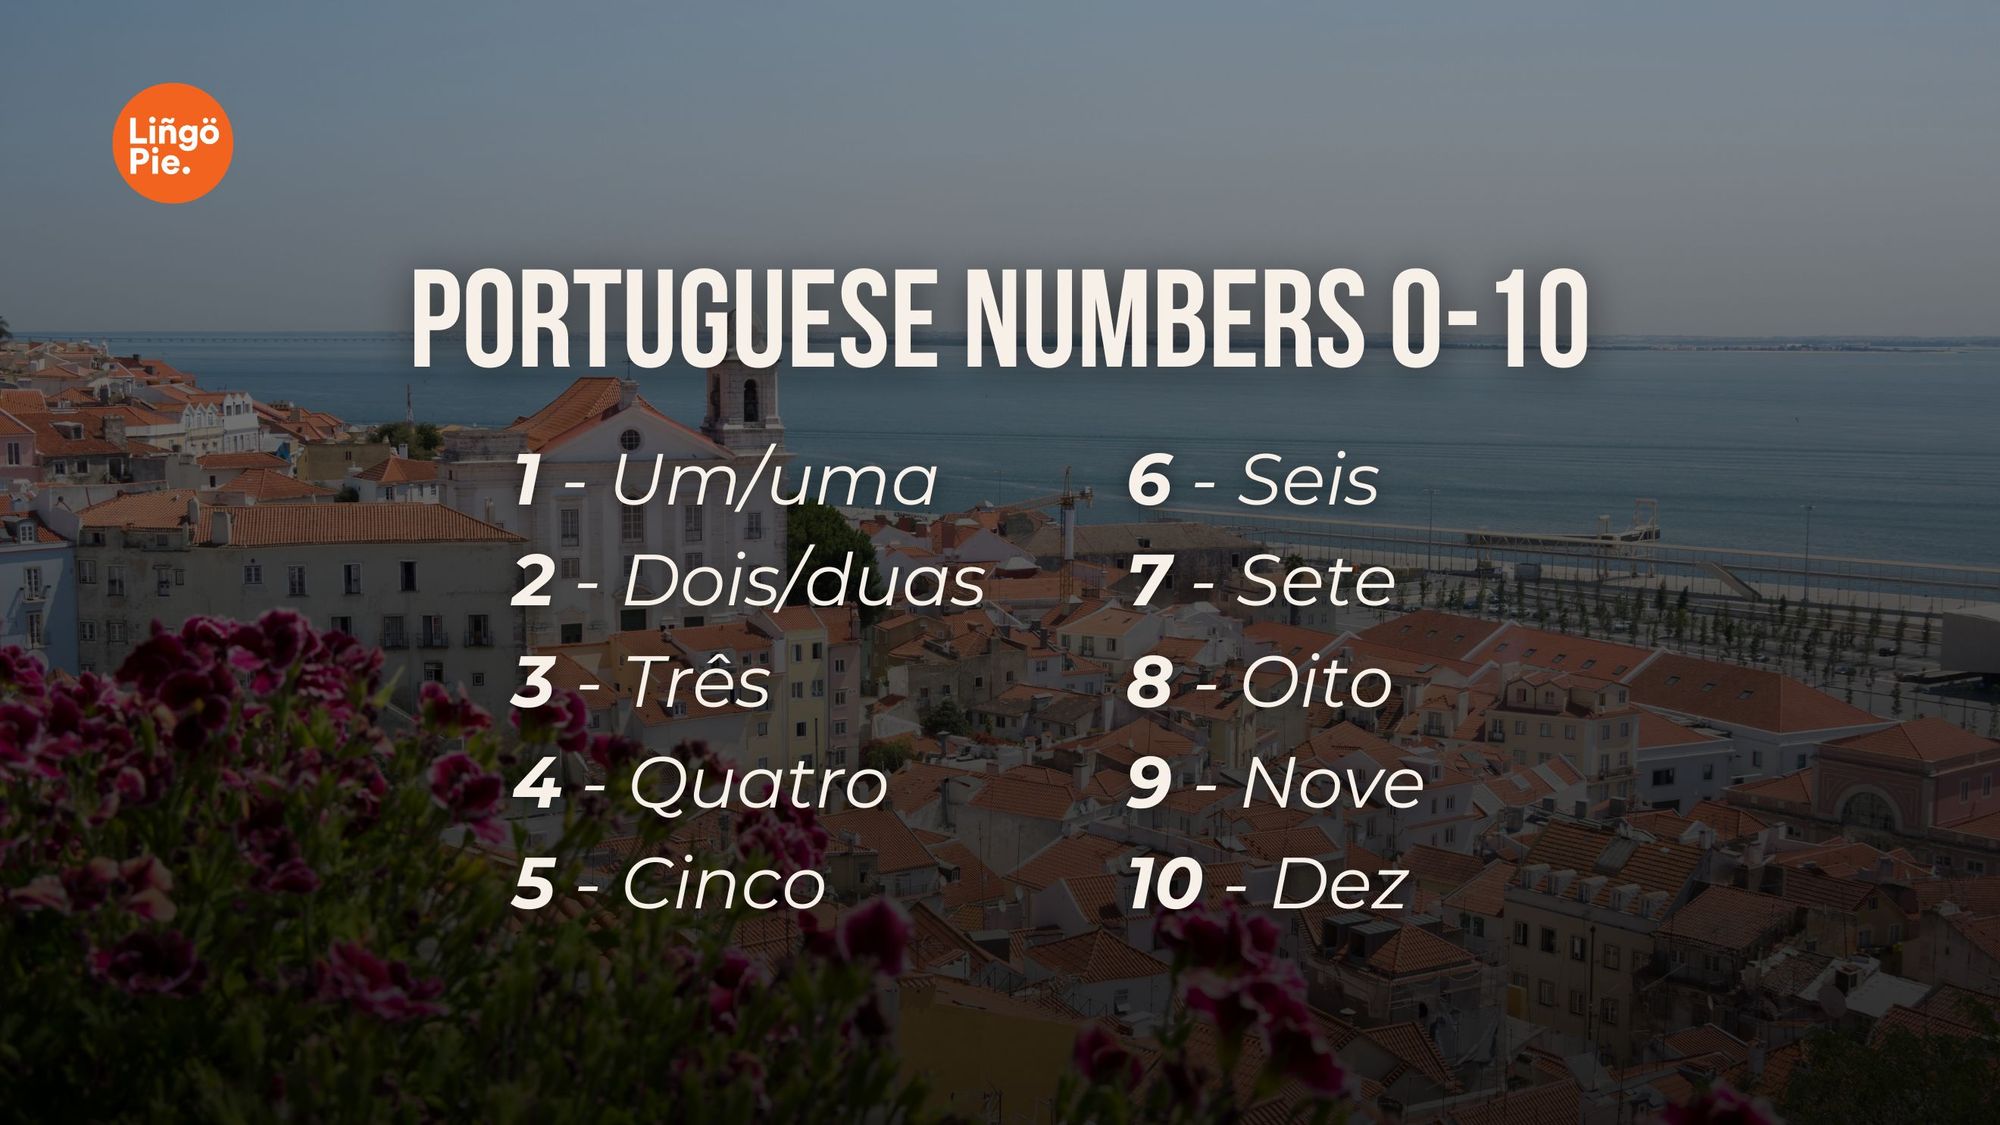 Portuguese Numbers 0-10